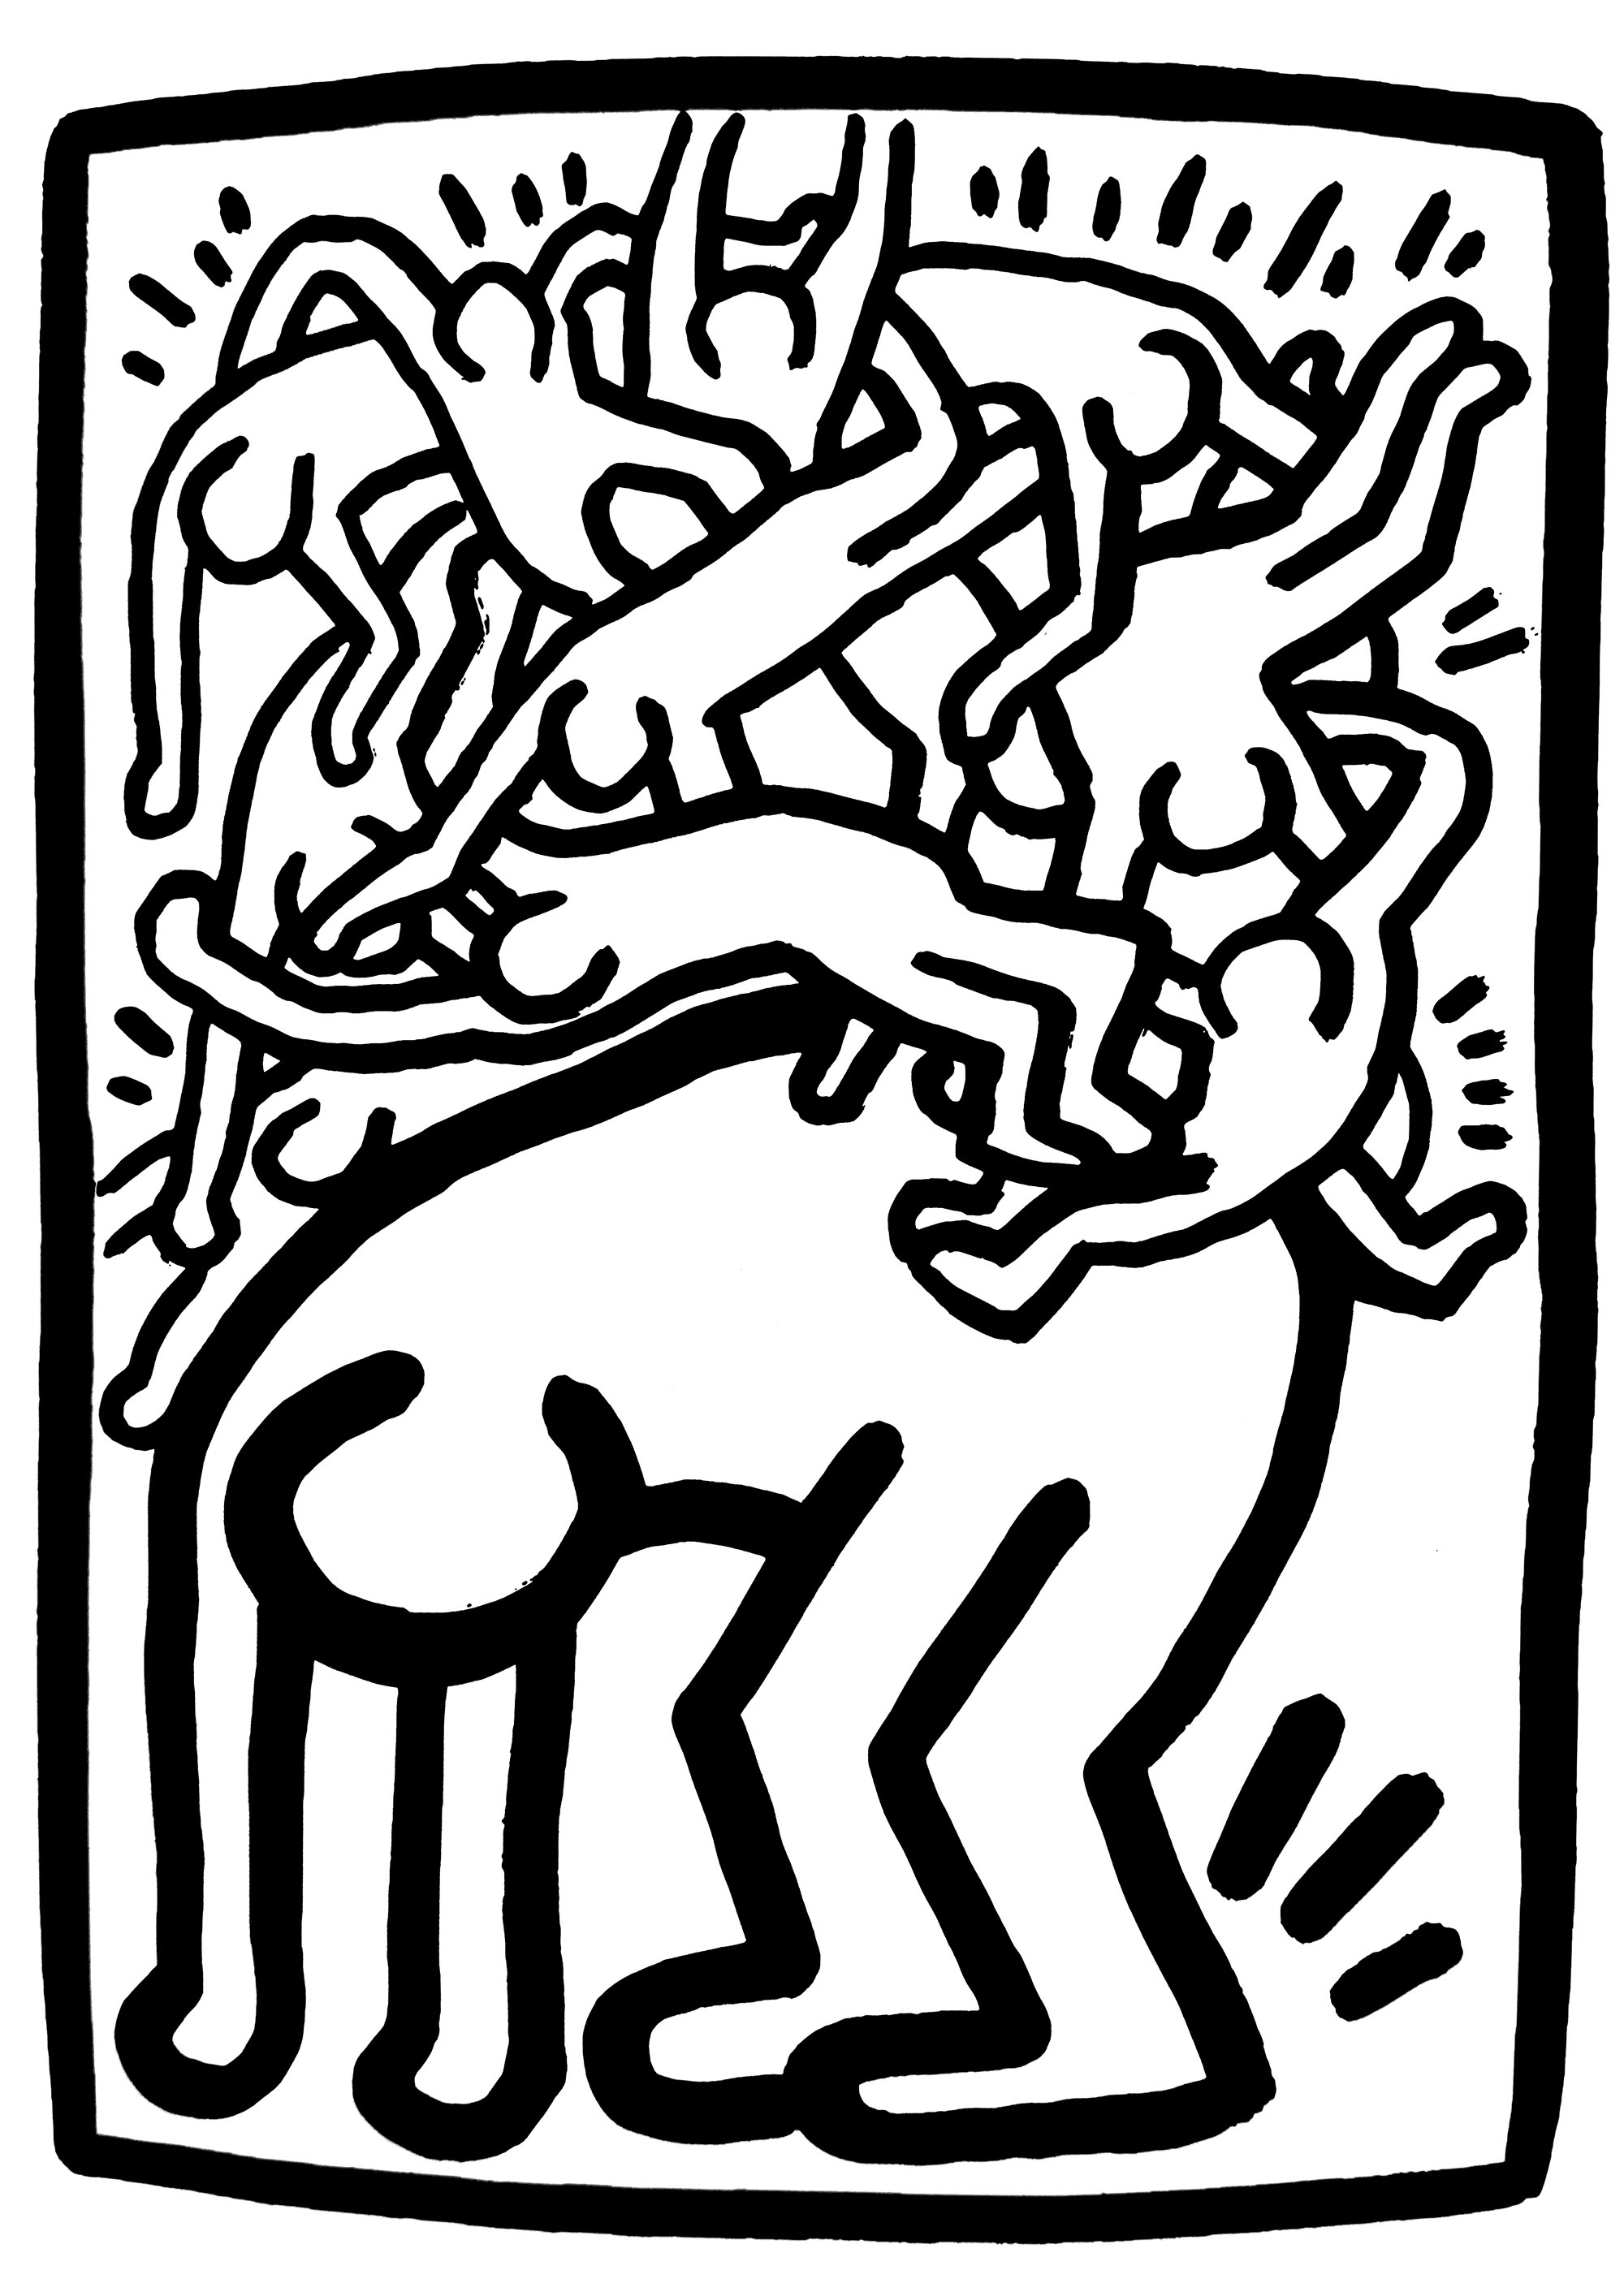 Keith haring multiples personnages. On the back of a large figure, a multitude of small characters intermingle, dancing and jumping with boundless energy.